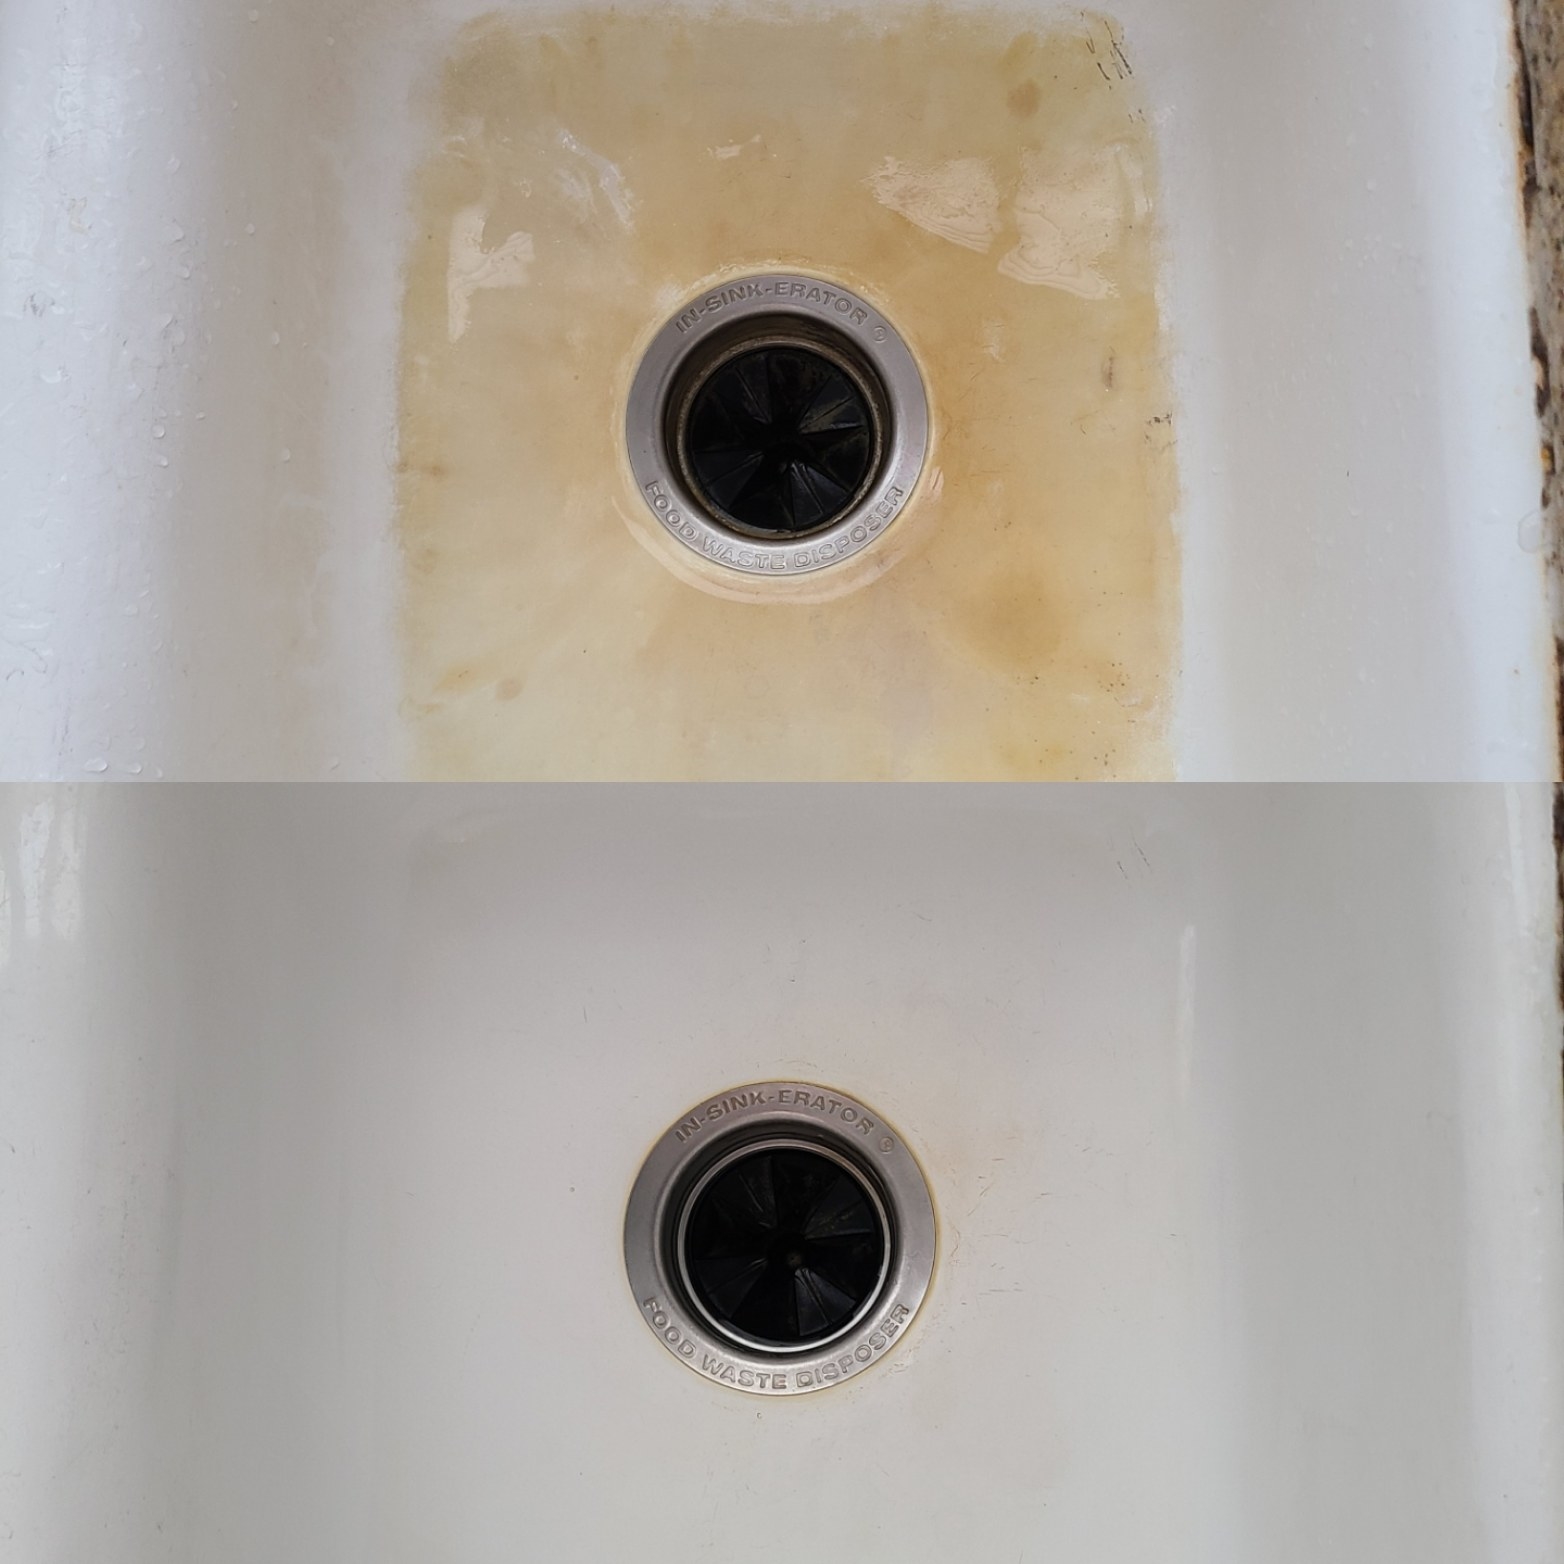 A reviewer&#x27;s porcelain sink before/after a large rusty stain is removed